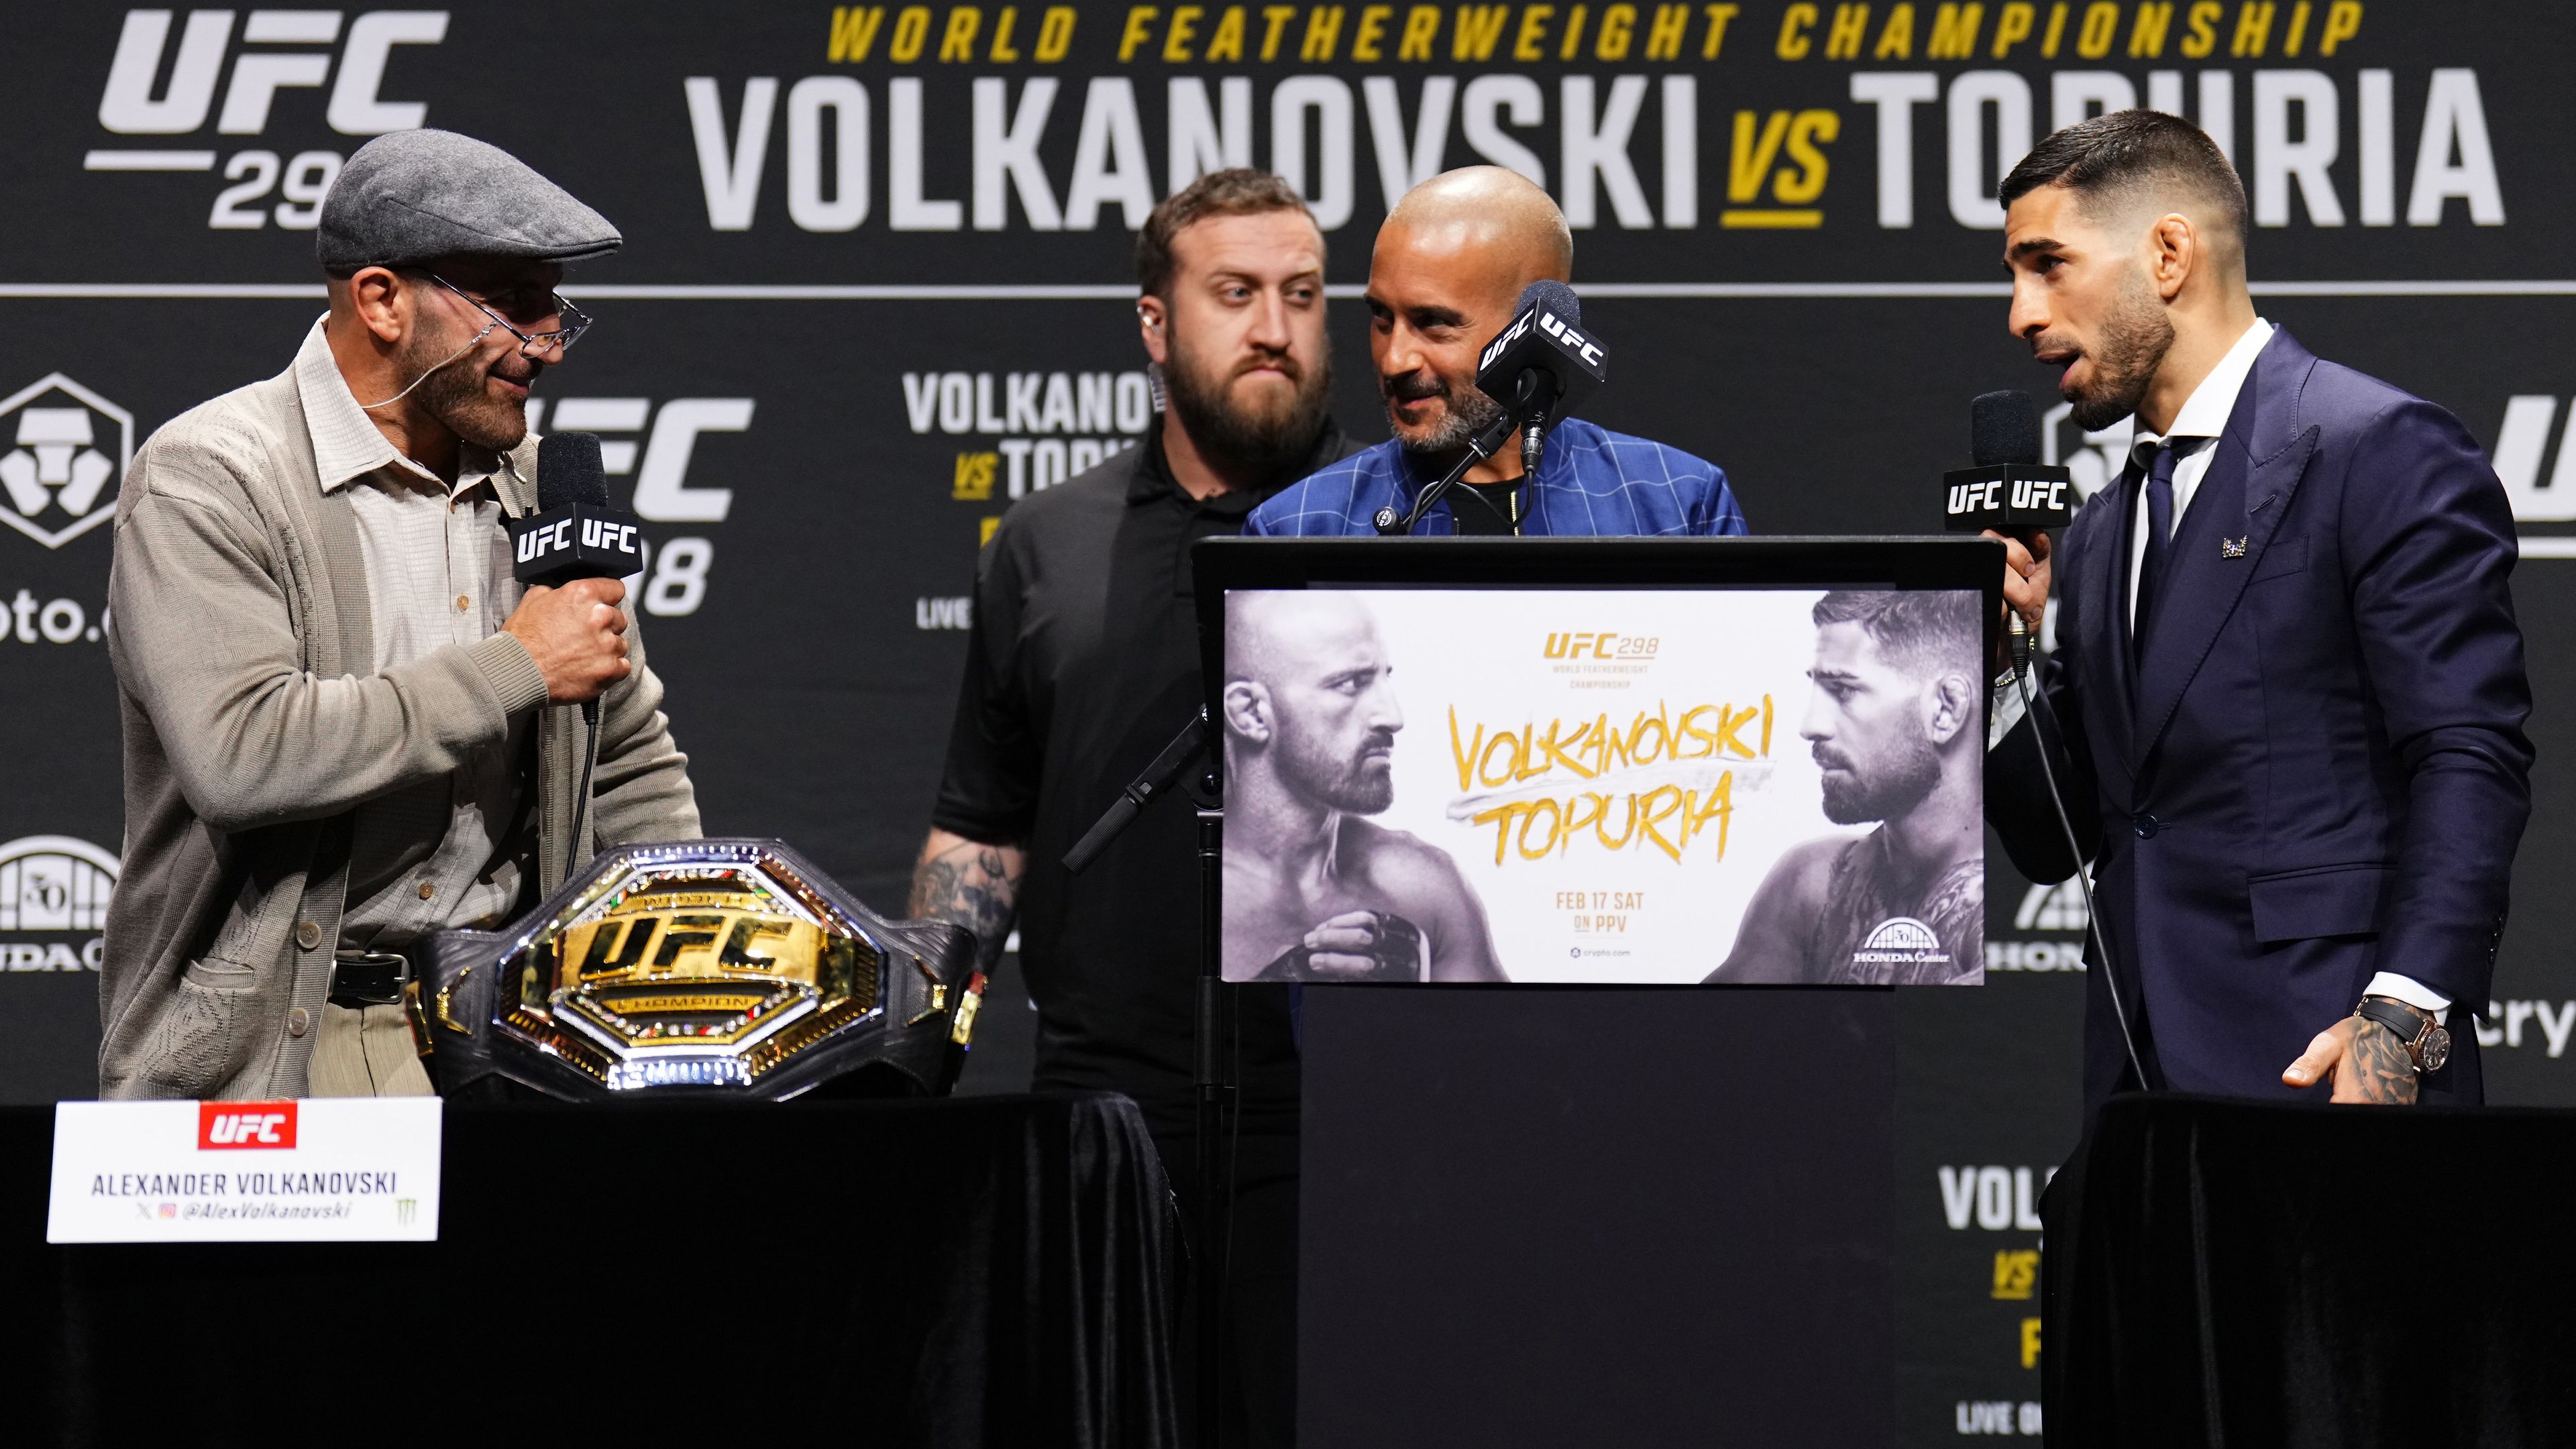 'Gonna make this look easy': Volkanovski clashes with UFC 298 rival in wild press conference